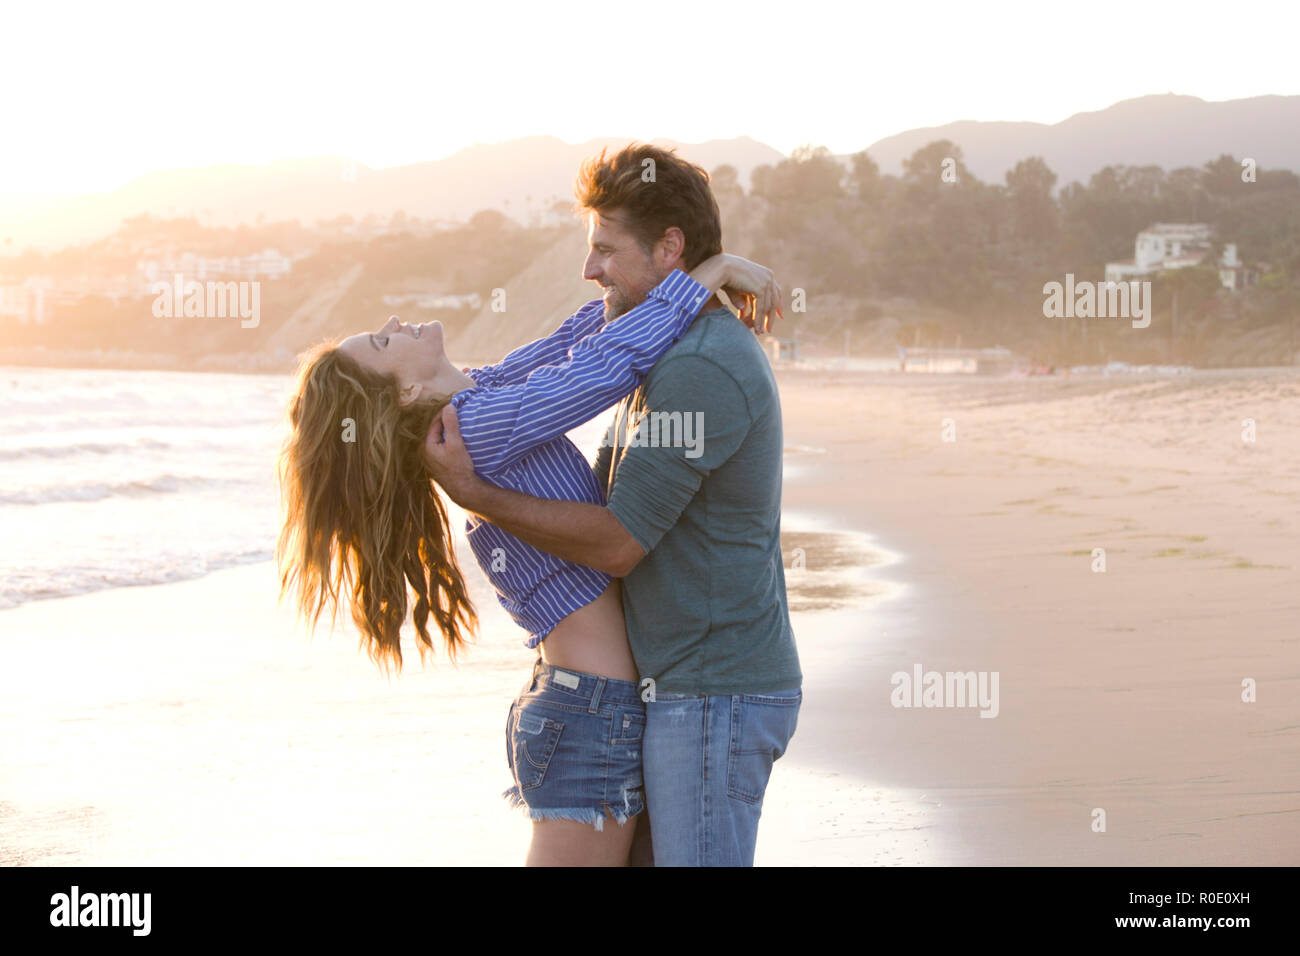 Carefree Mid-Adult Couple at Beach Stock Photo